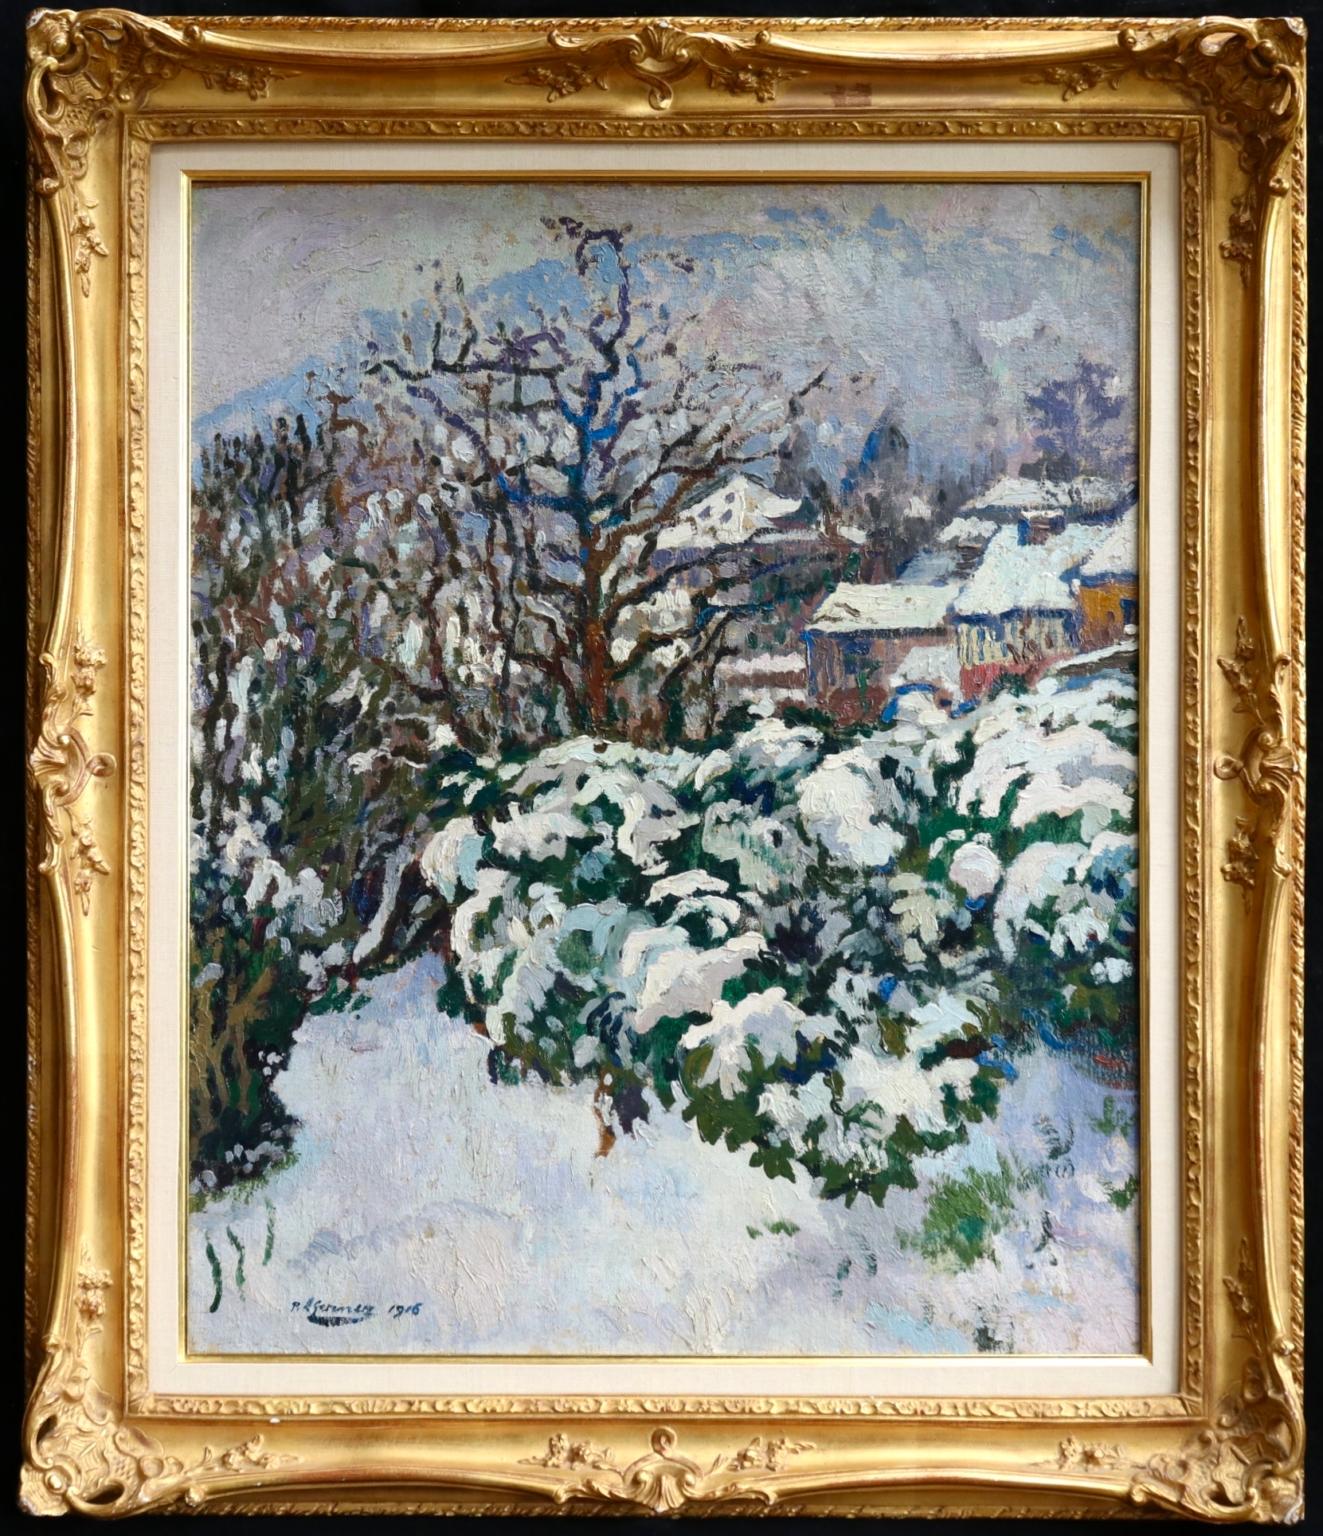 Post impressionist signed and dated landscape oil on panel by French painter Paul Elie Gernez. The work depicts a snowy winter landscape with white snow blanketing the trees and bushes in the foreground and the rooftops of houses in the distance.